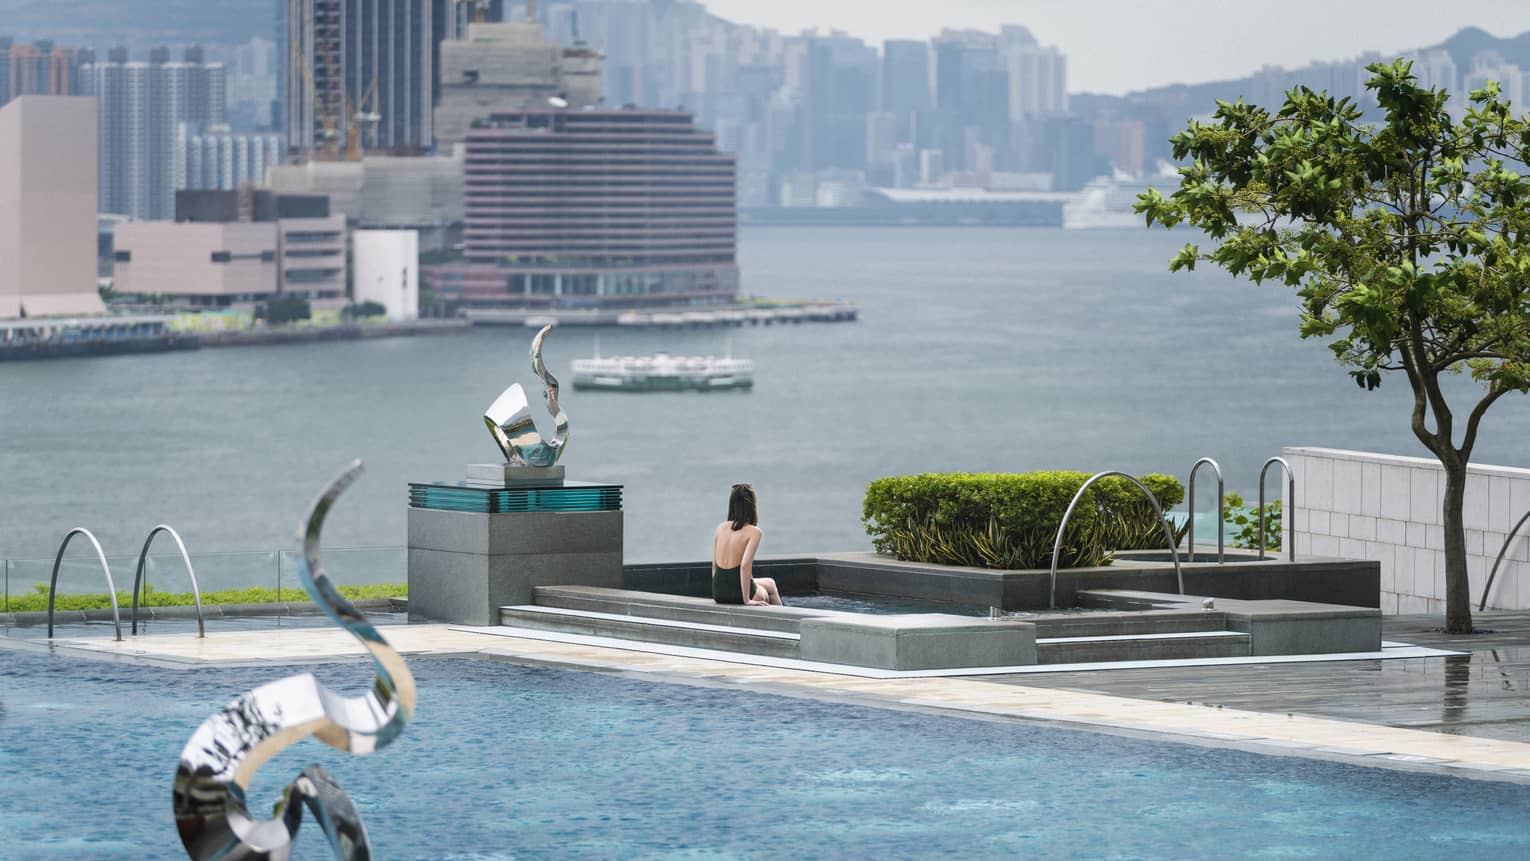 Woman in swimsuit sits on edge of swimming pool on patio near modern silver sculptures, waterfront